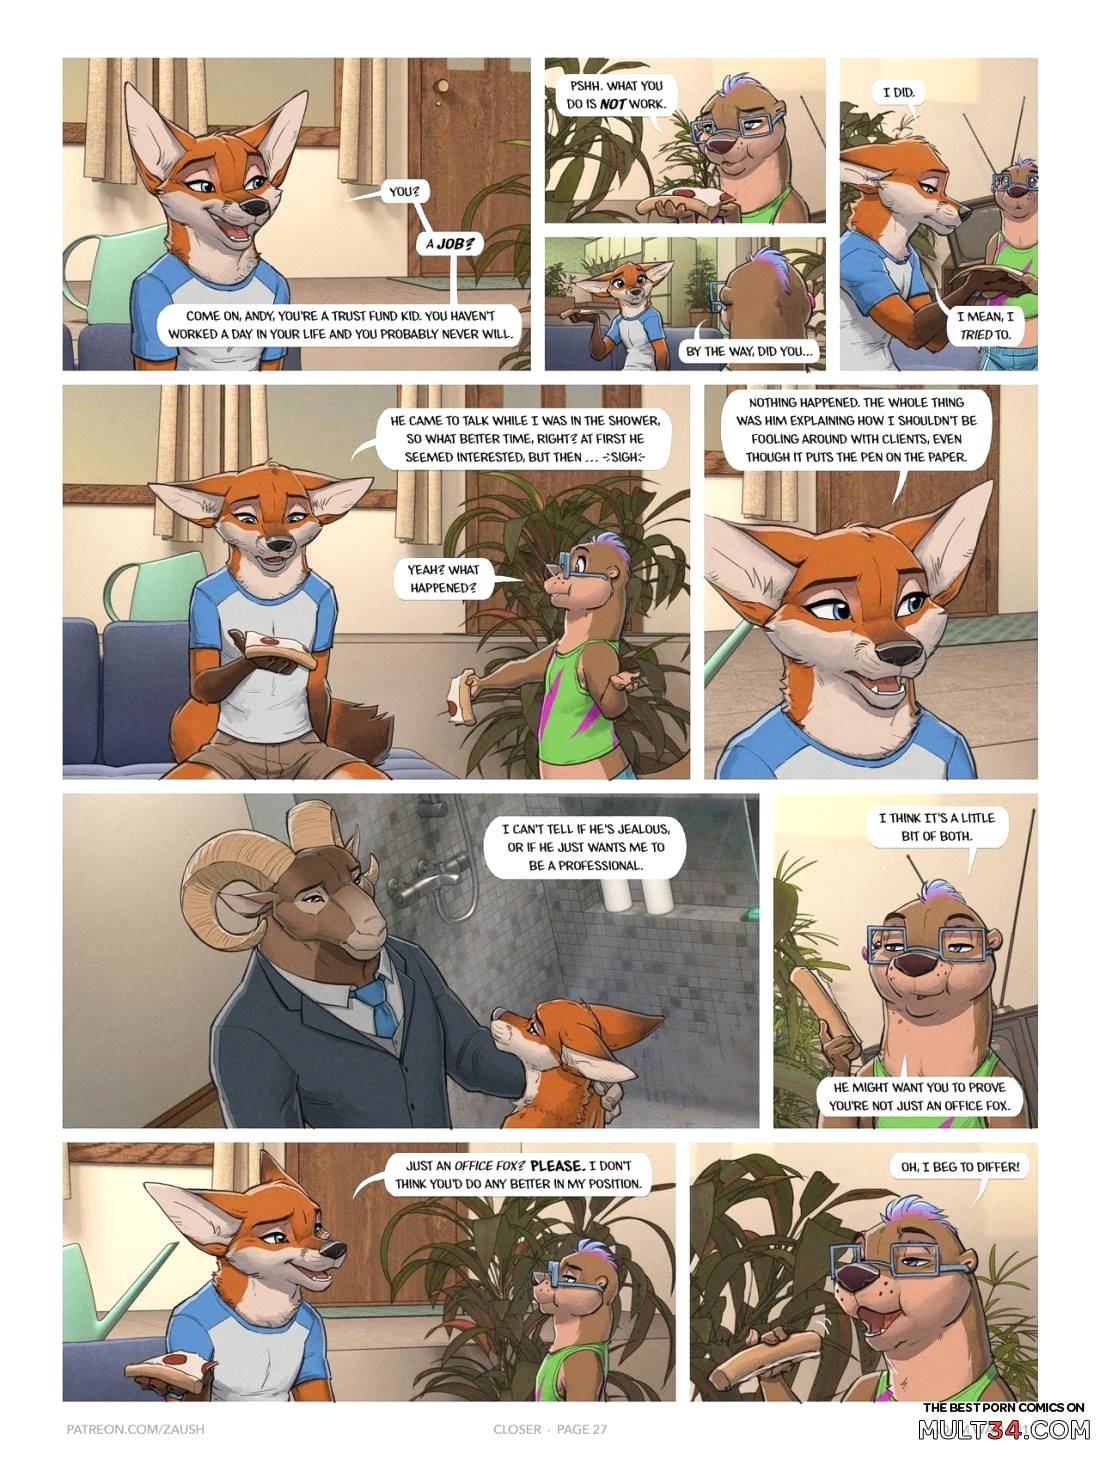 Closer page 27